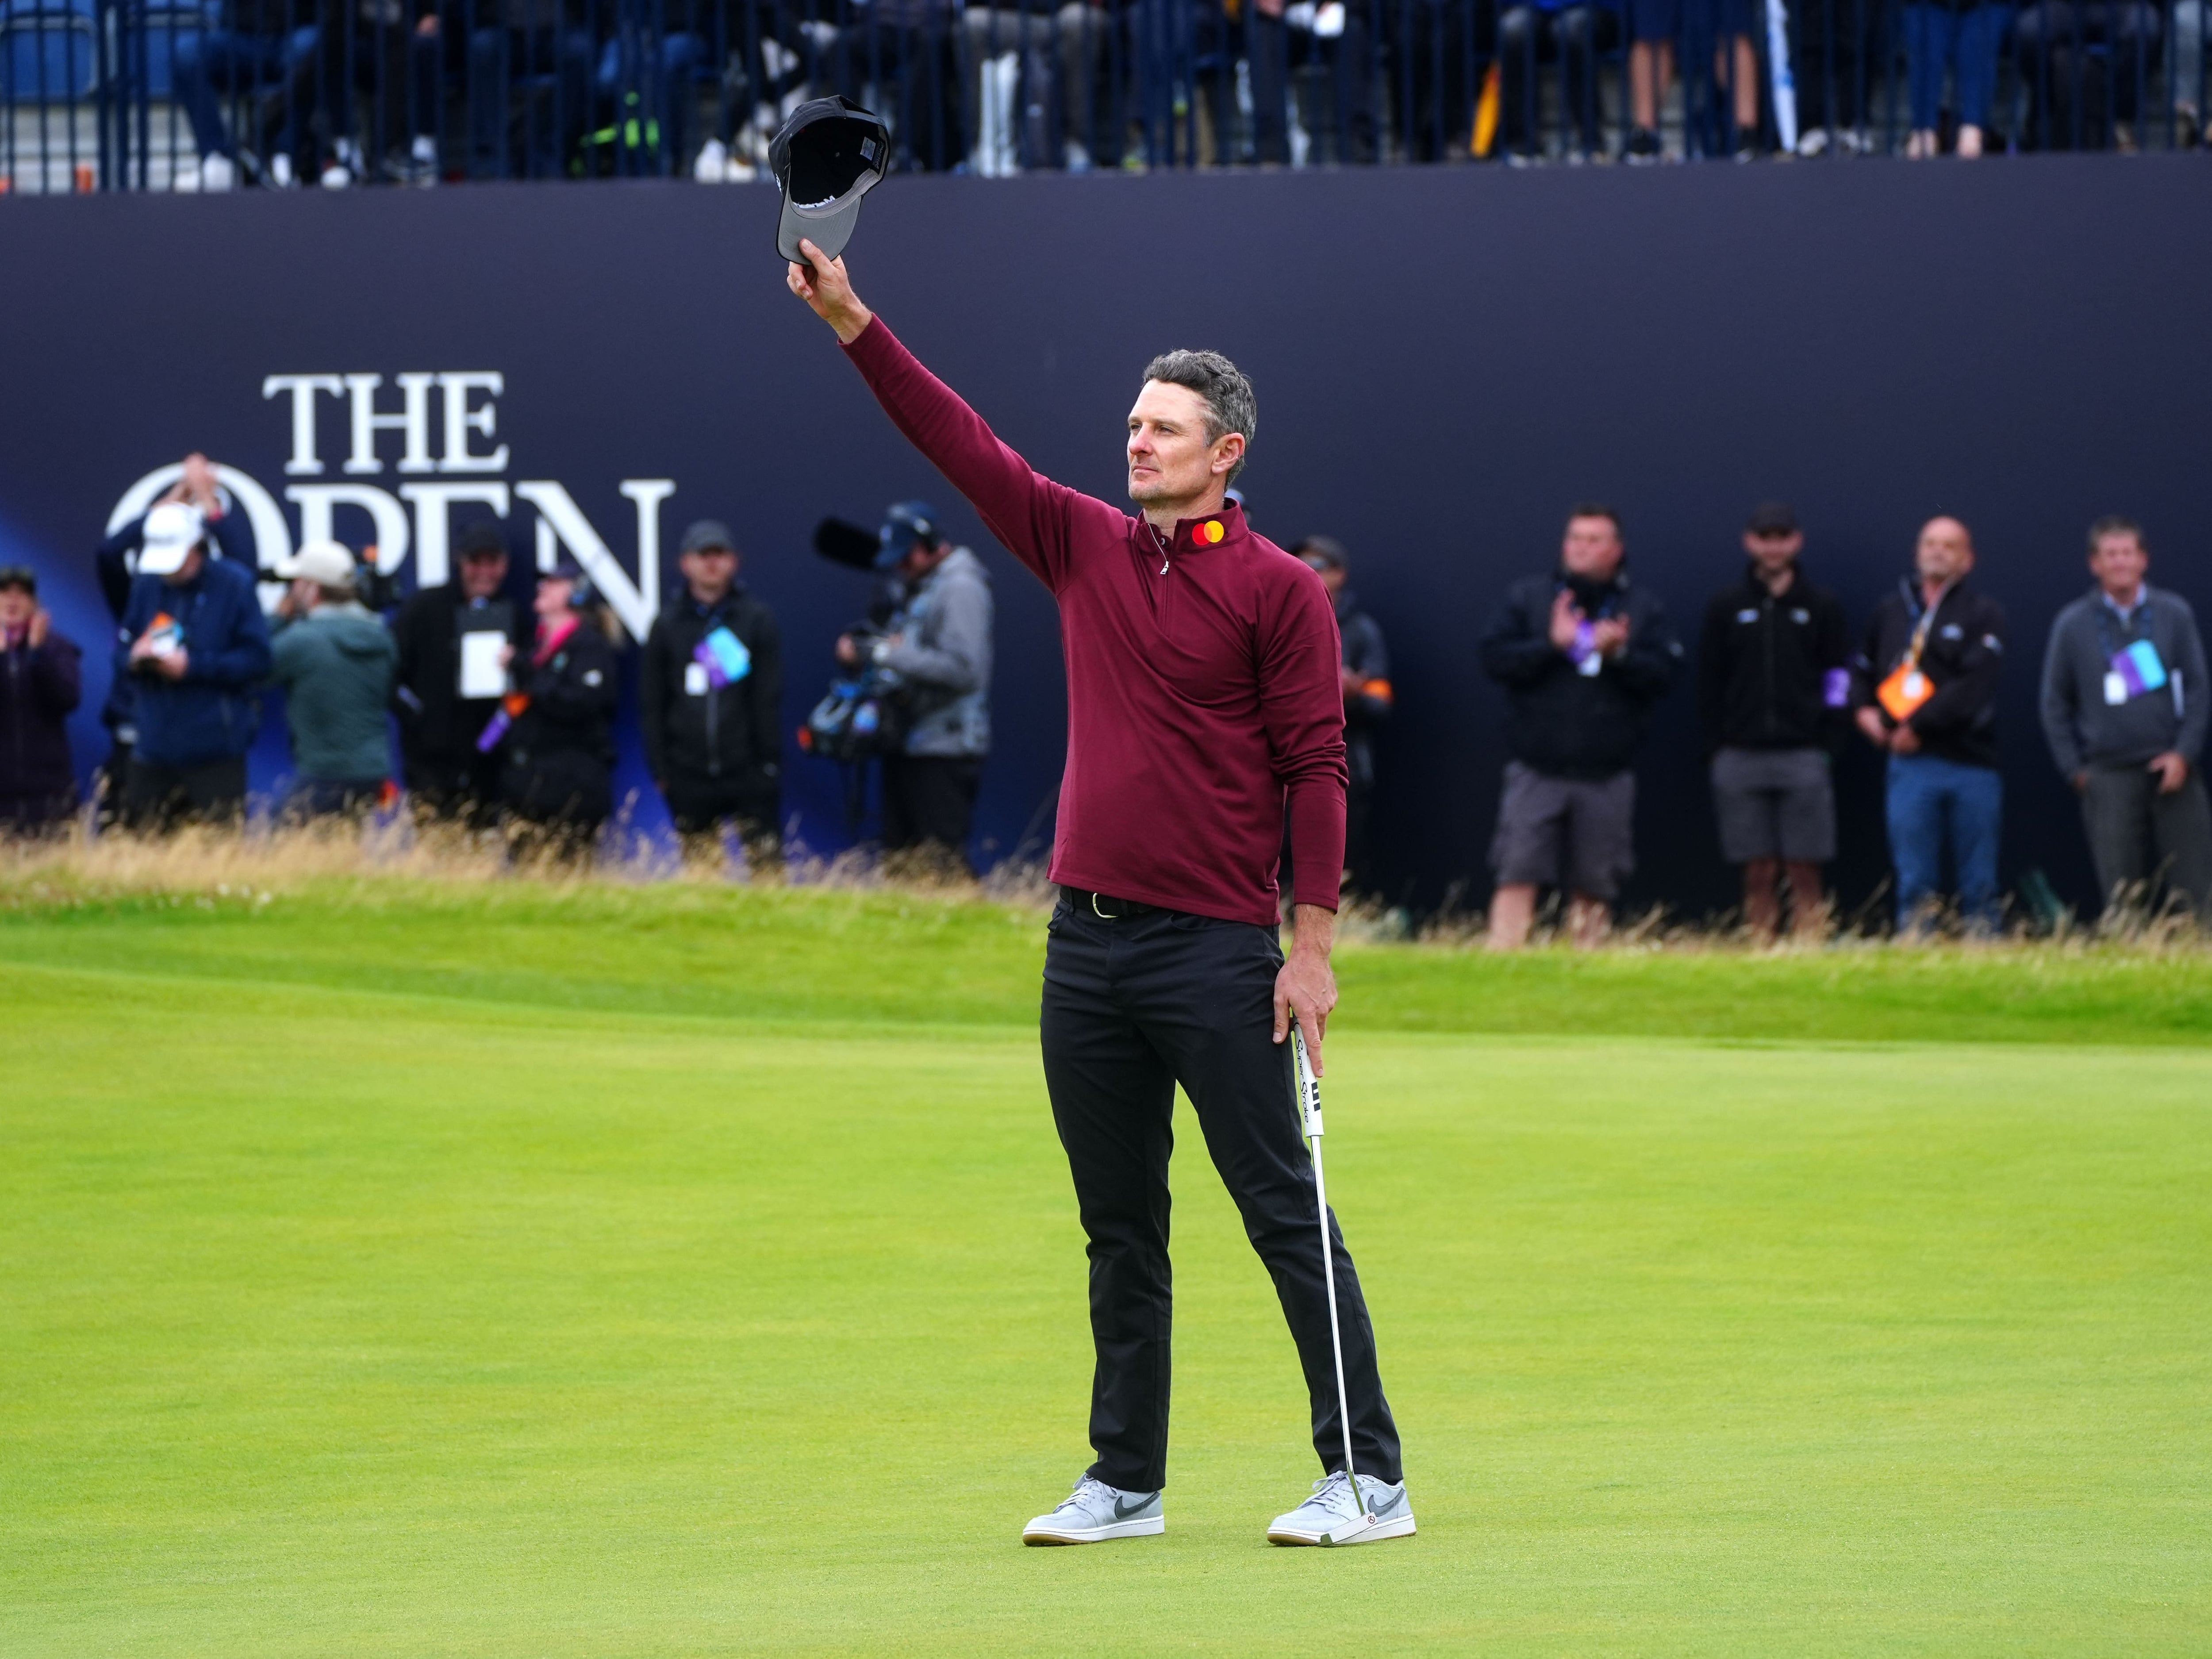 Mixed emotions as Justin Rose secures share of second at the Open